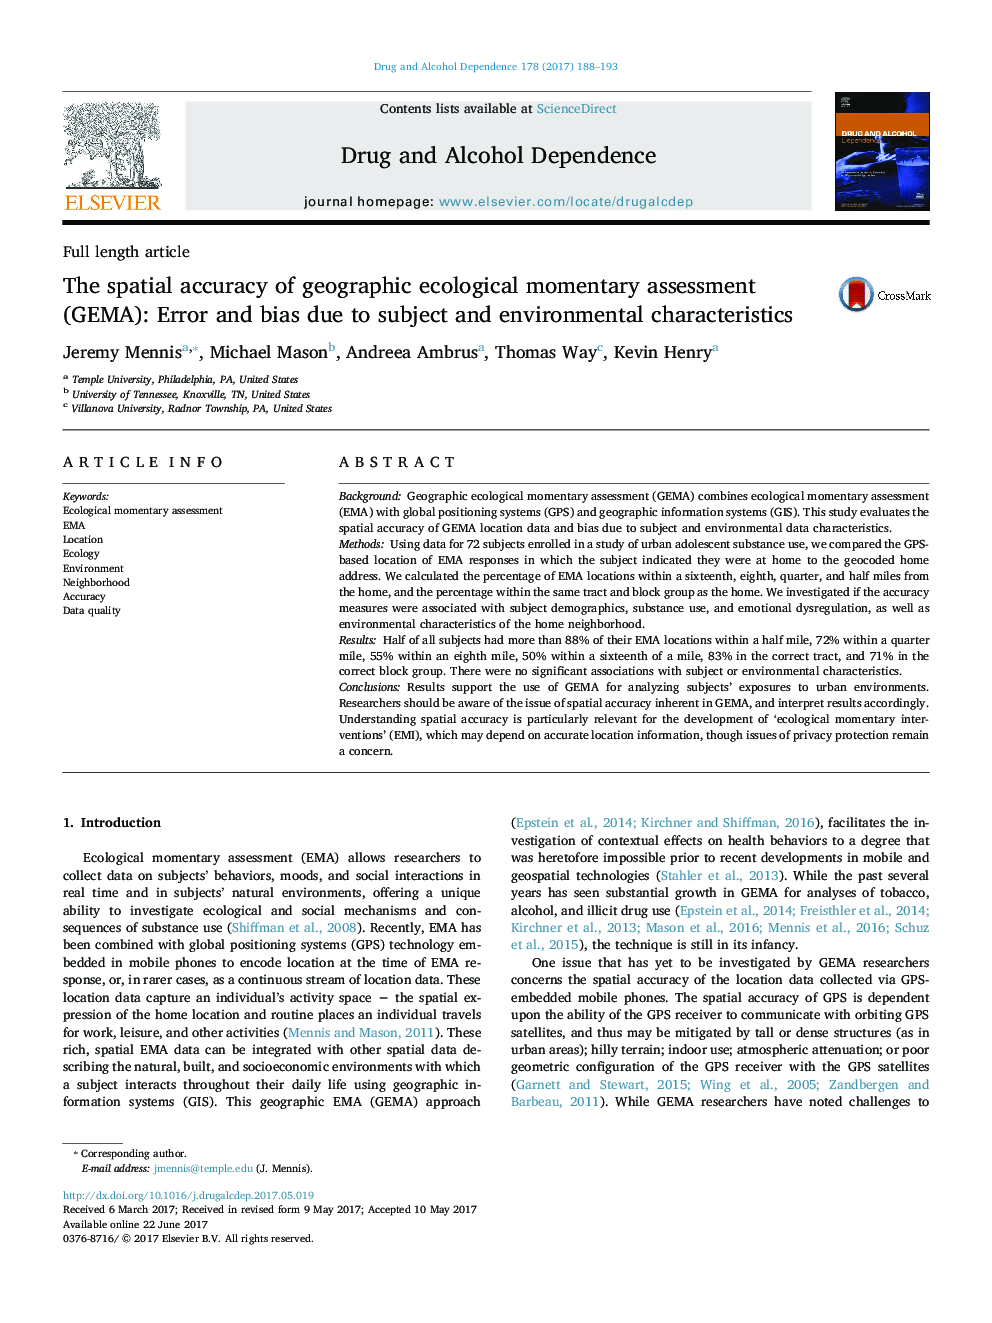 The spatial accuracy of geographic ecological momentary assessment (GEMA): Error and bias due to subject and environmental characteristics